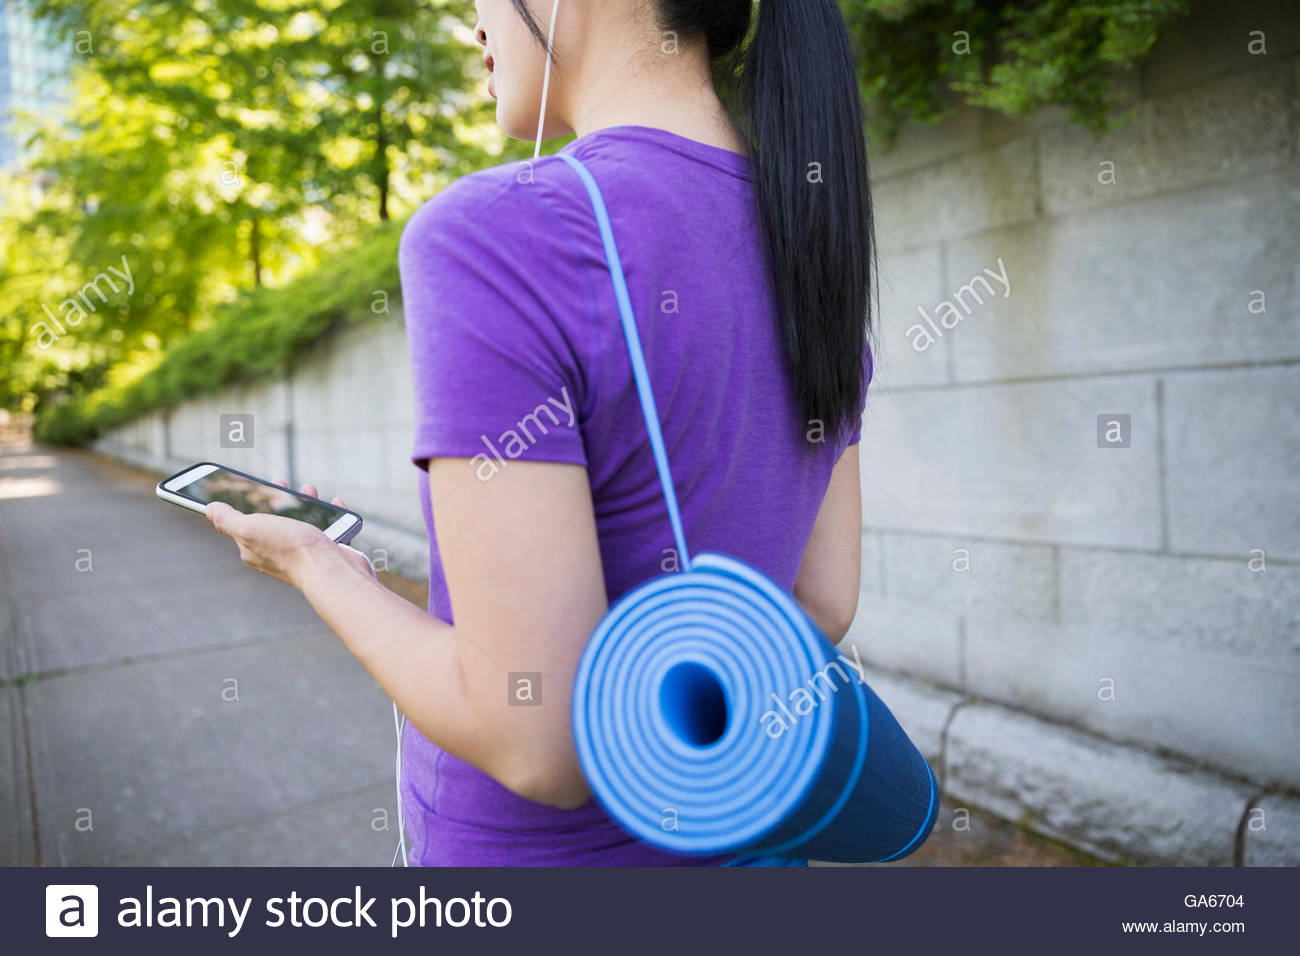 Pregnant woman with yoga mat and headphones using cell phone Stock Photo